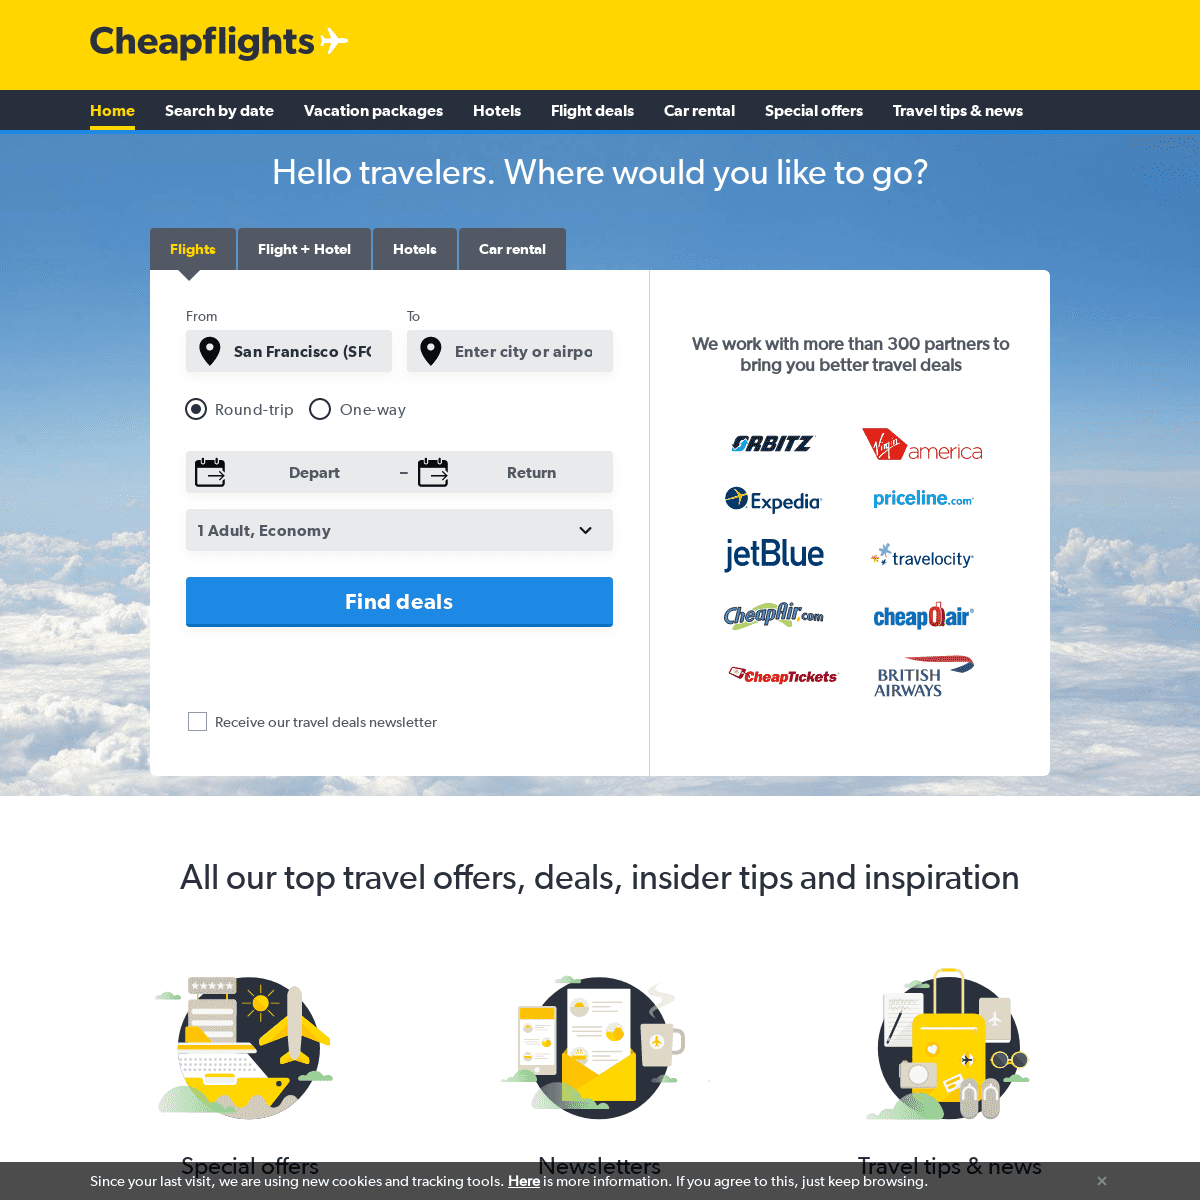 A complete backup of cheapflights.com